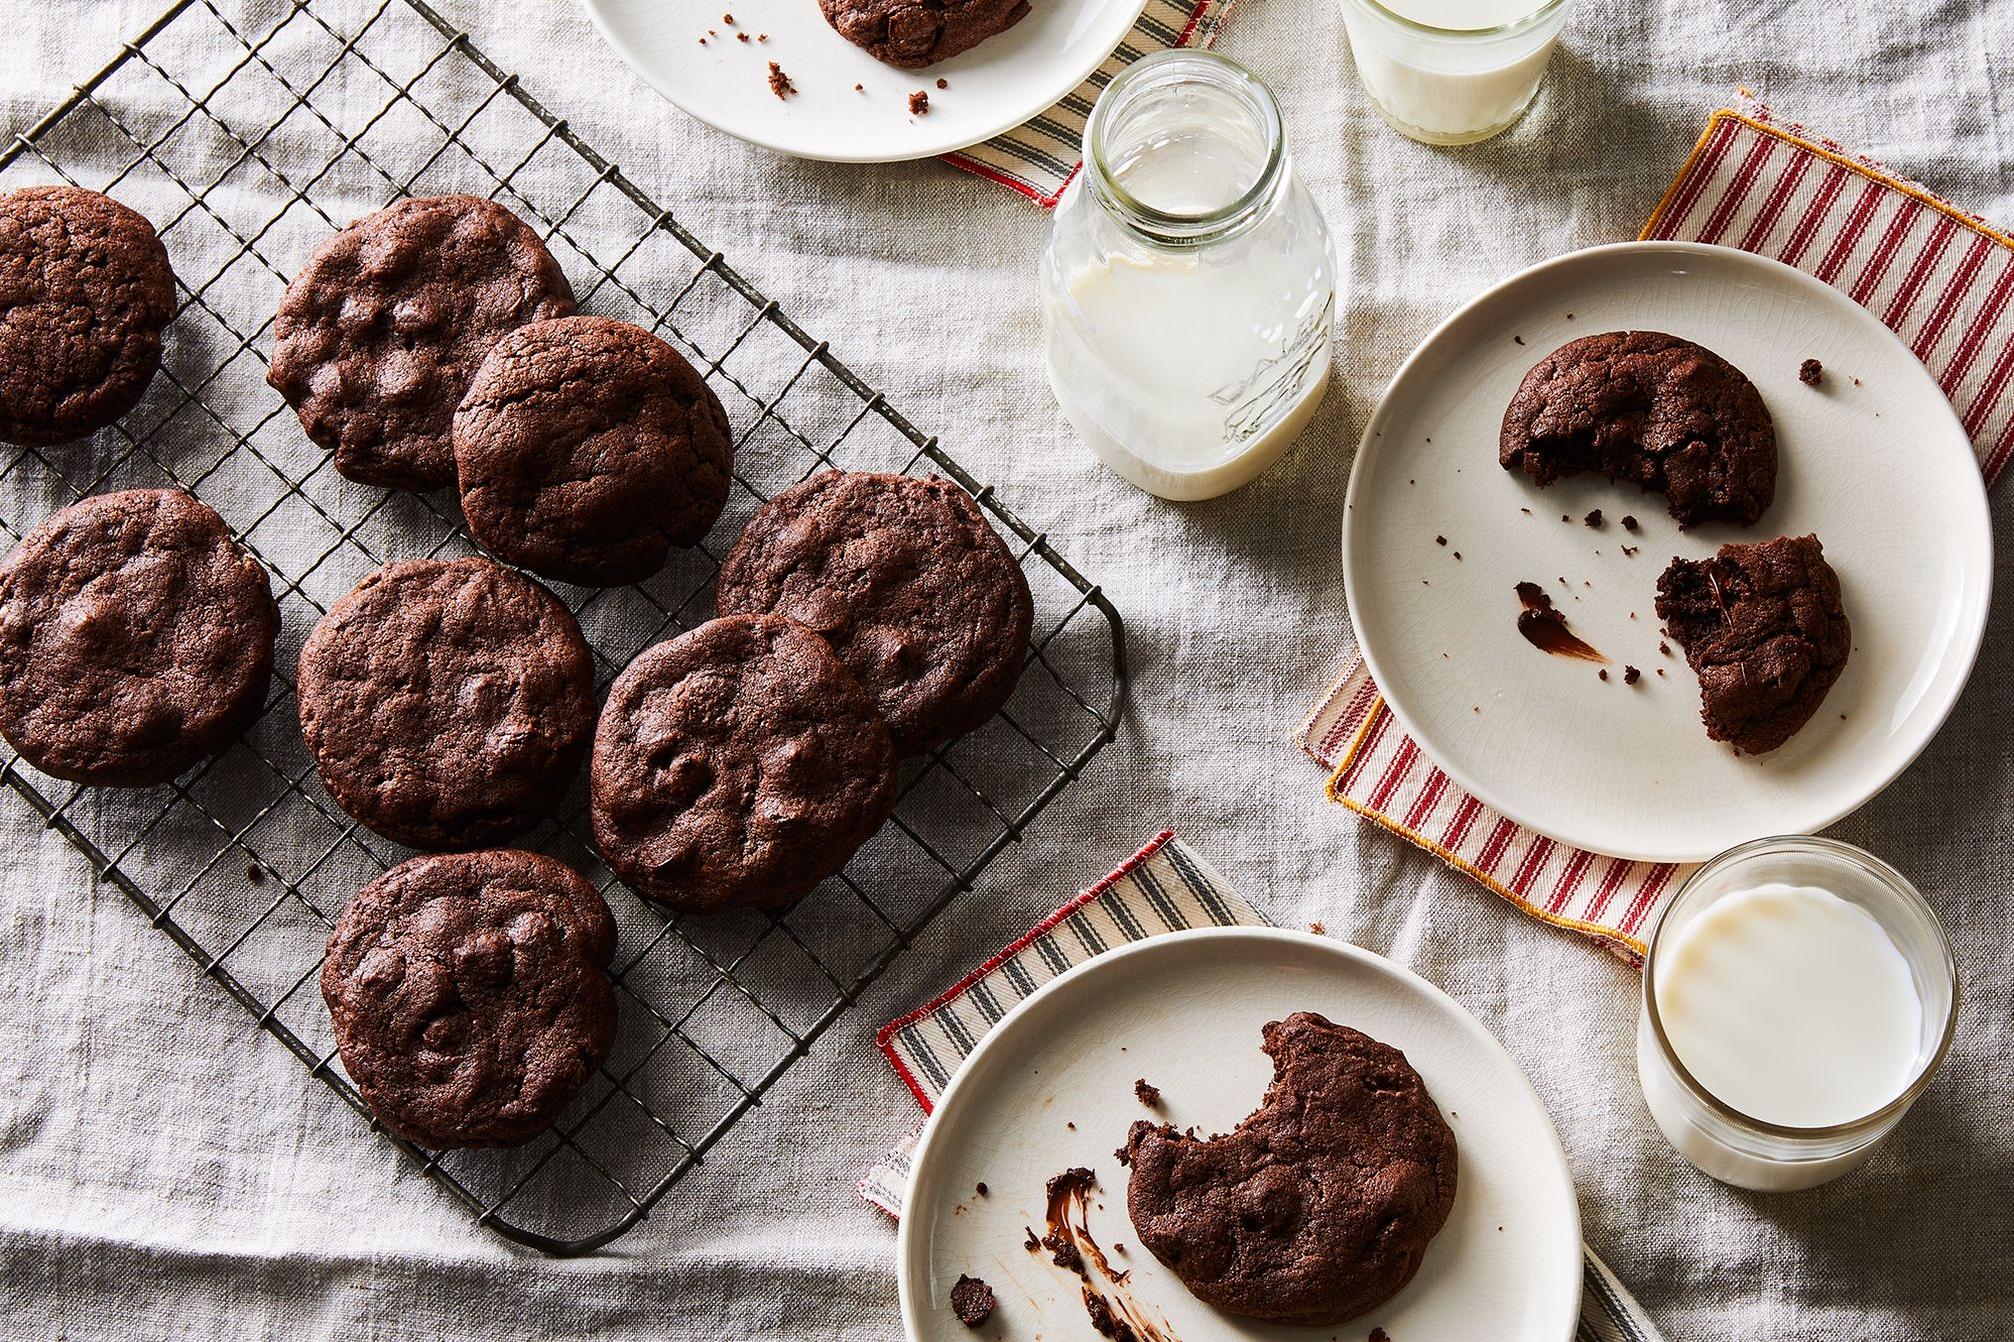  Who needs a cup of coffee when you can have these espresso-infused cookies?